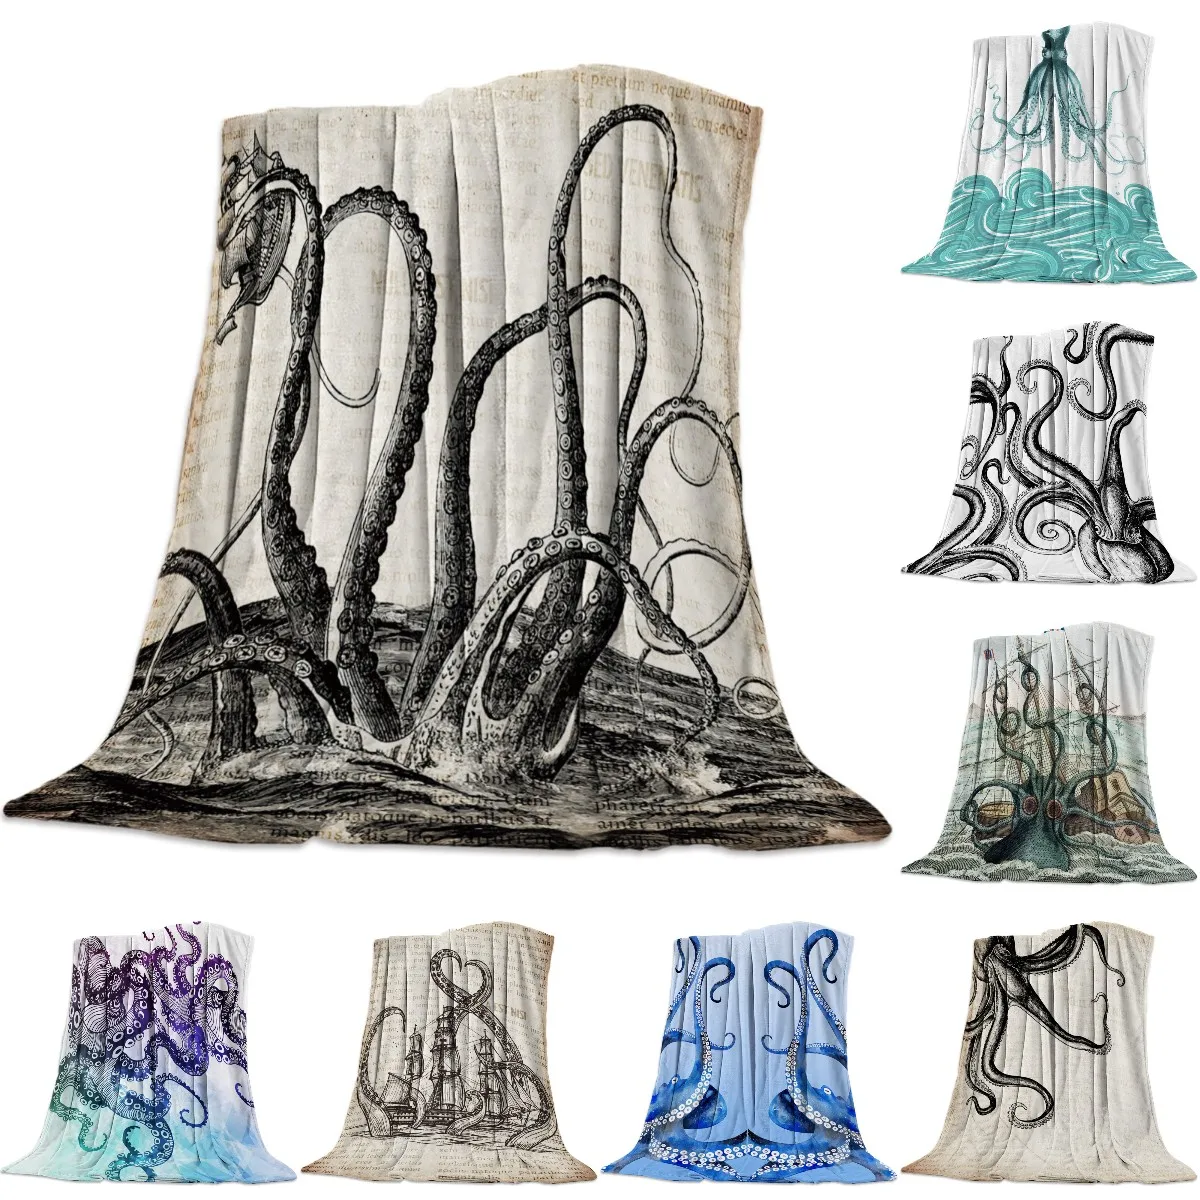 

Cthulhu Octopus Old Newspaper Flannel Blanket for Bed Sofa Portable Soft Fleece Throw Funny Plush Bedspreads Queen King Size